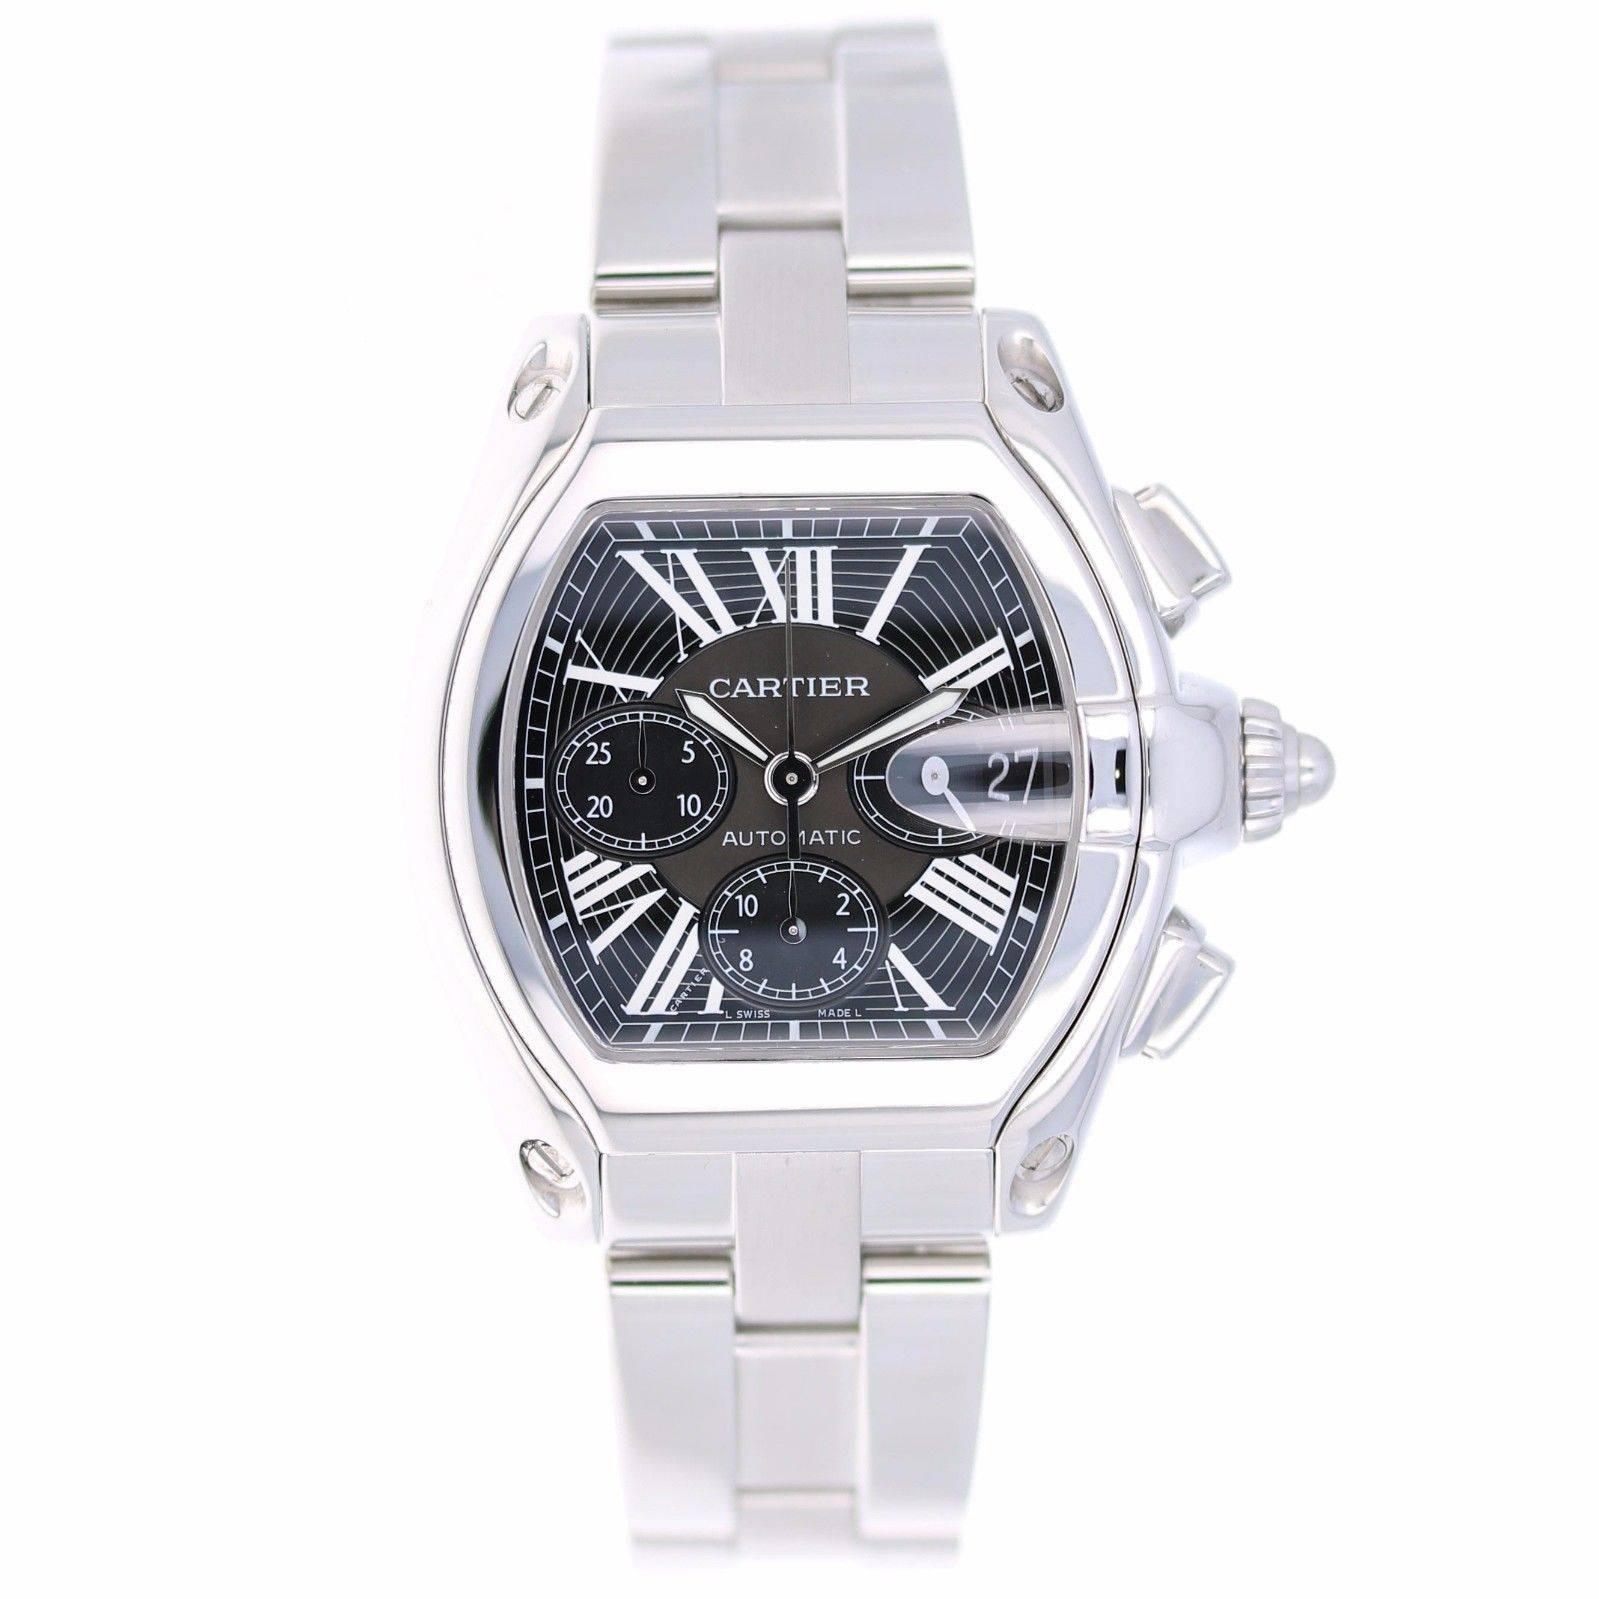 Cartier Stainless Steel Roadster Chronograph XL Black Dial Automatic Wristwatch